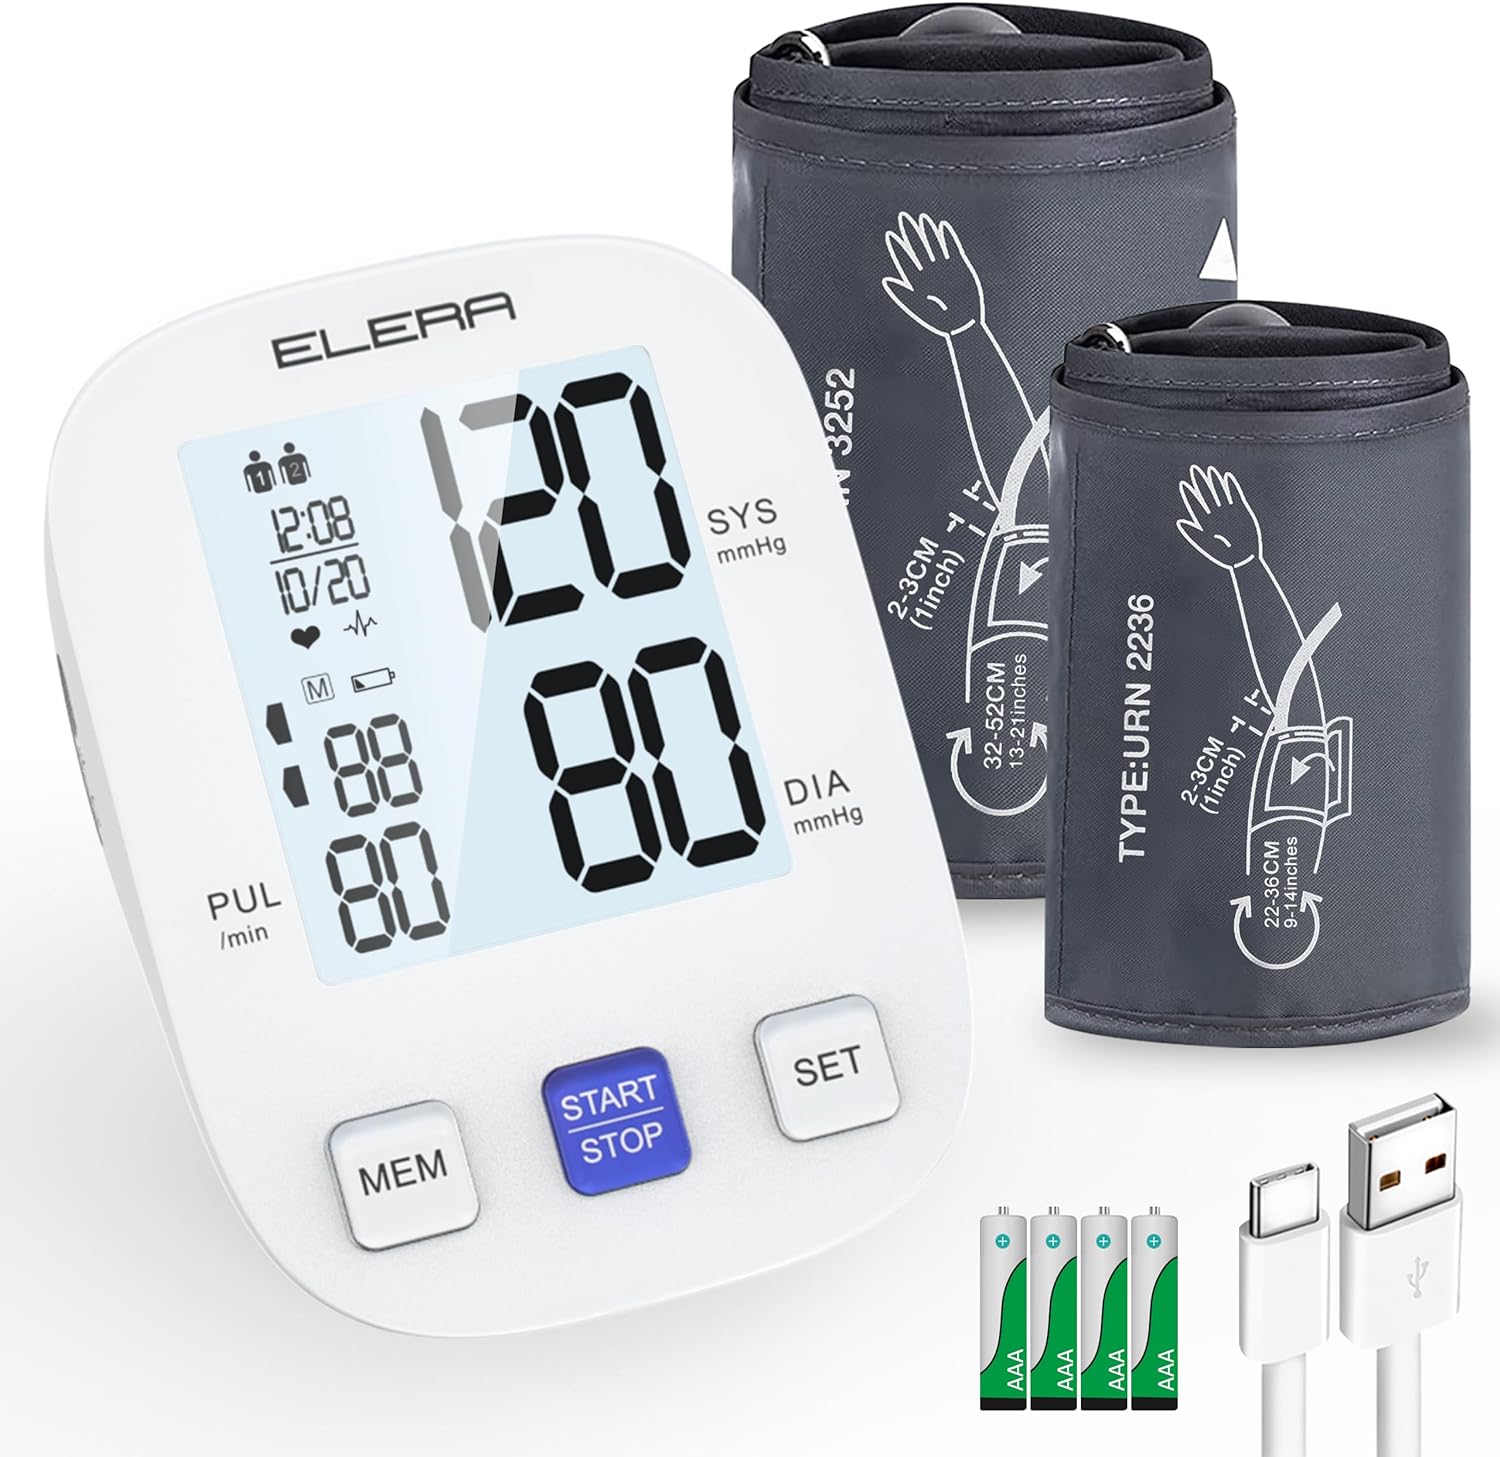 ELERA Blood Pressure Monitor with Two Cuffs - Extra Large Cuff 13-21 and Standard 9-14, Accurate Automatic BP Machine with Large Screen, USB Cable and 4 AAA Batteries - Ideal for Home Use